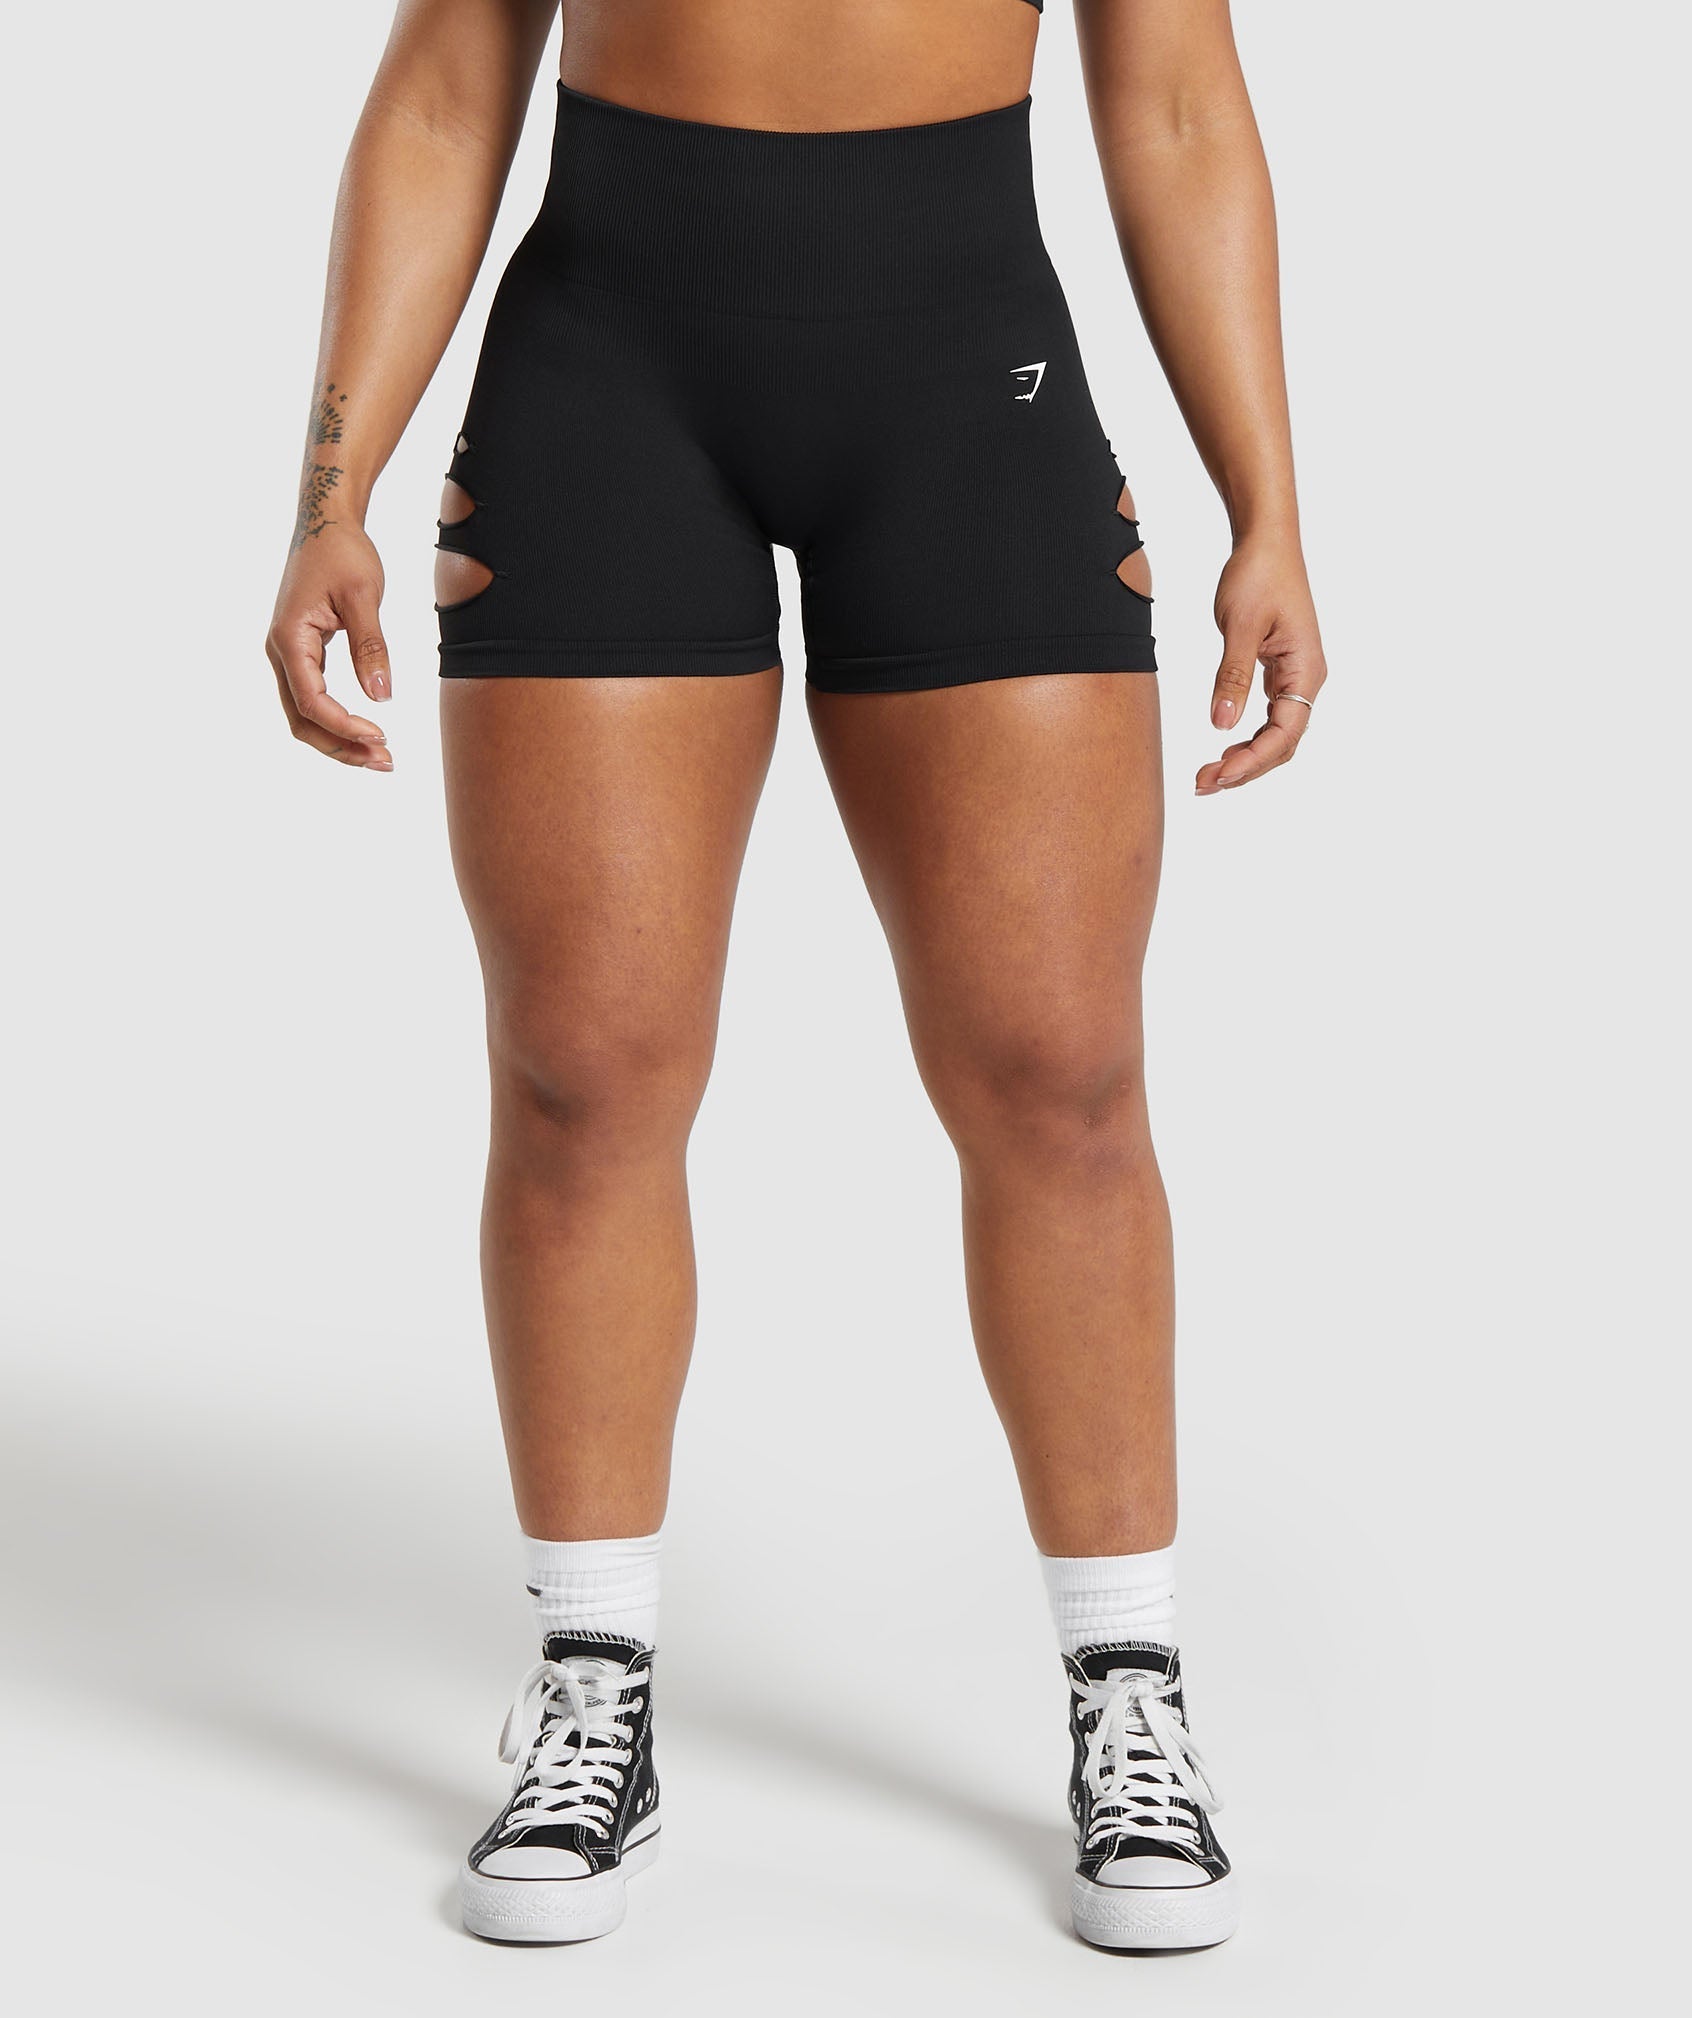 Gains Seamless Ripped Shorts in Black - view 2